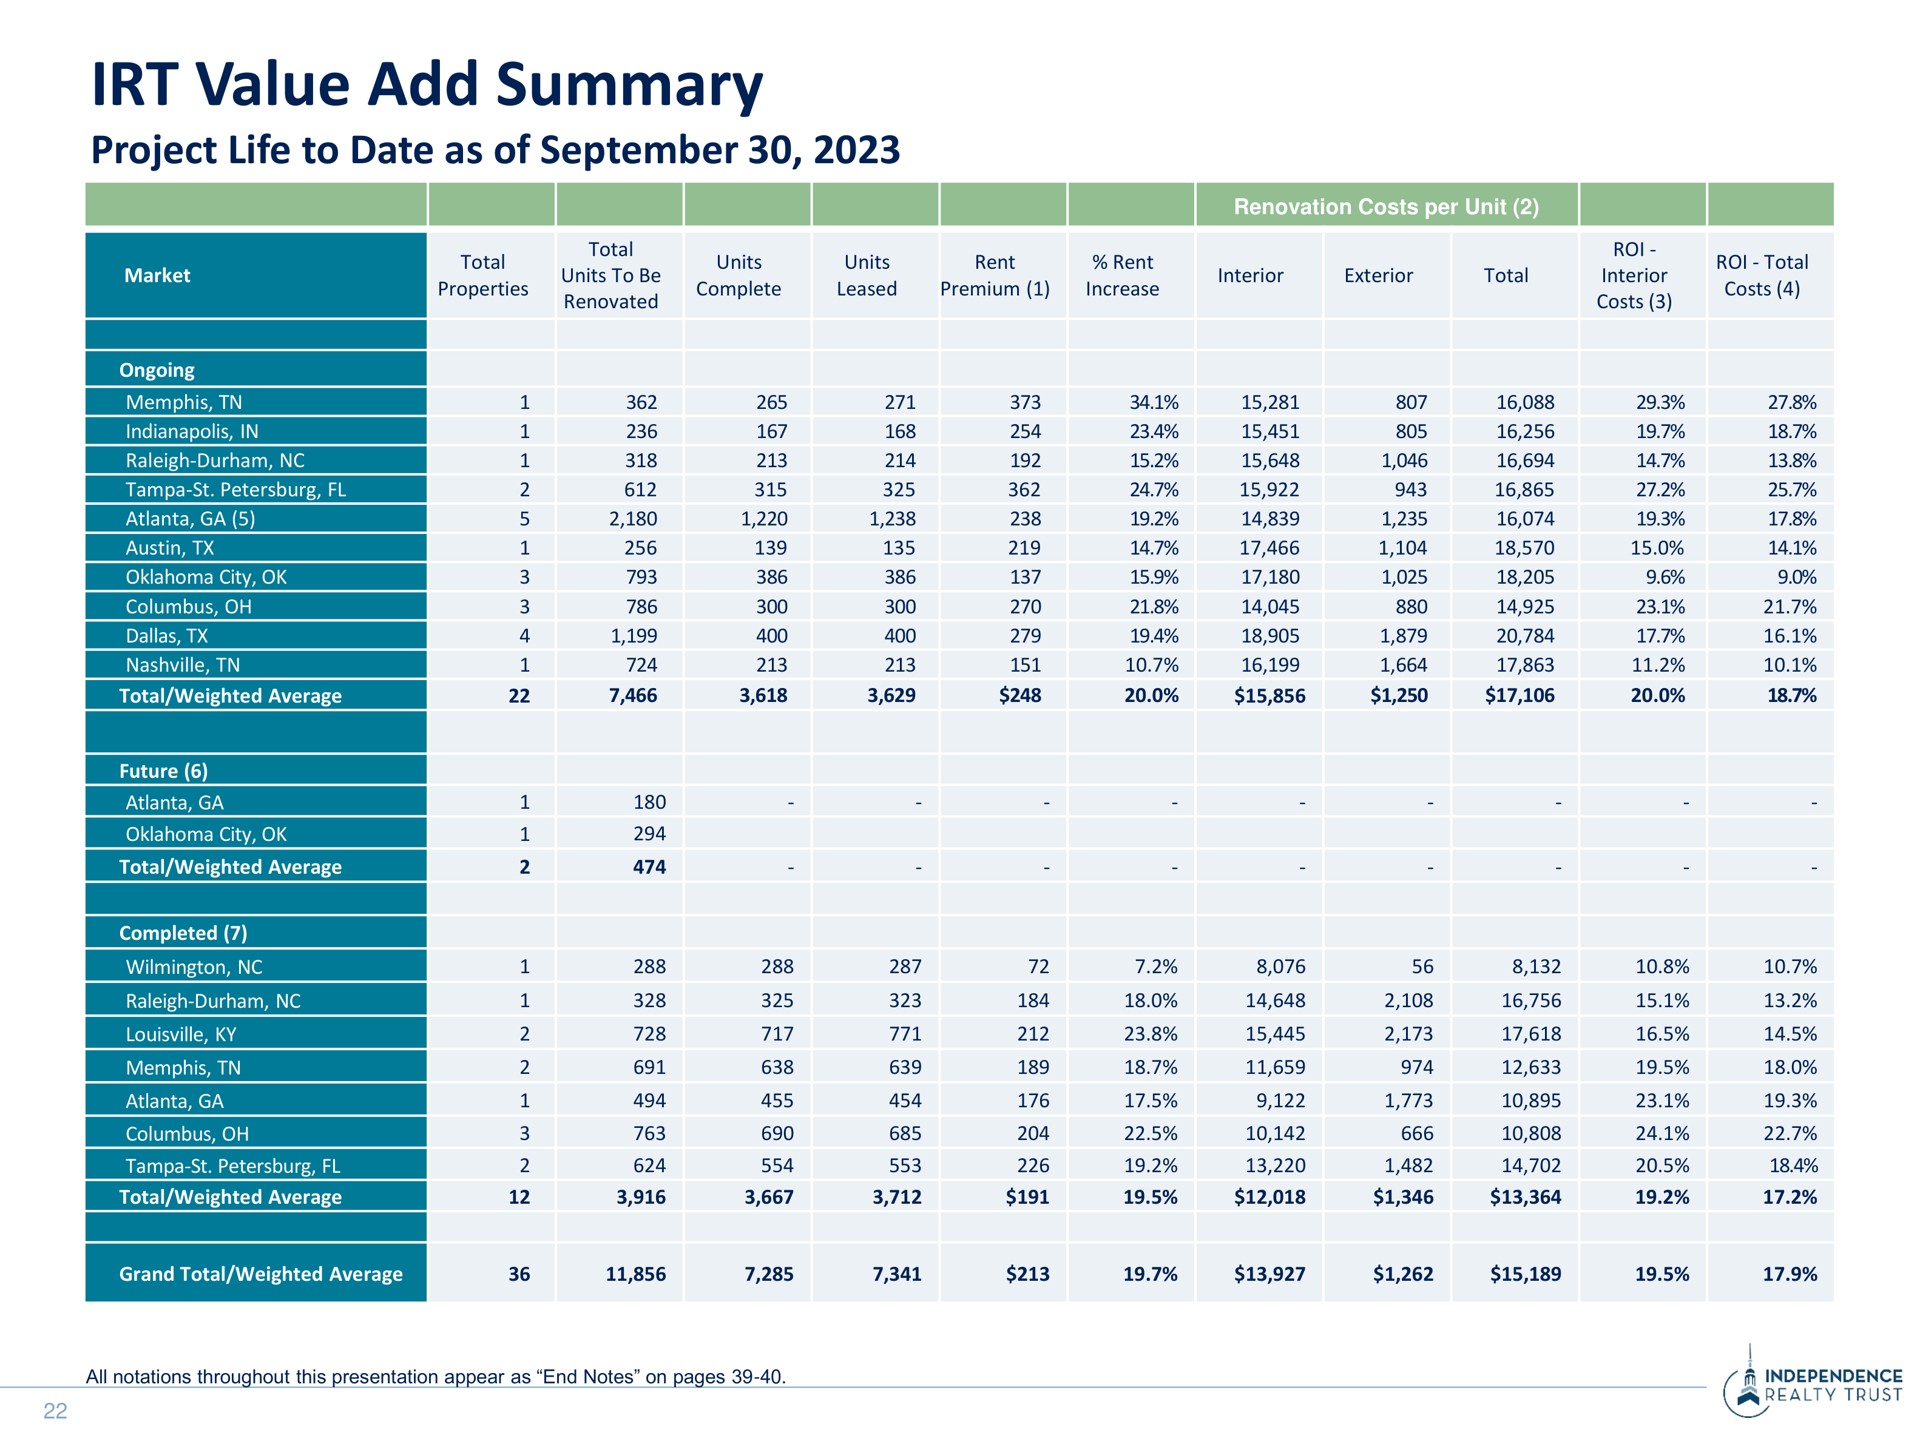 value add summary project life to date as of | Independence Realty Trust